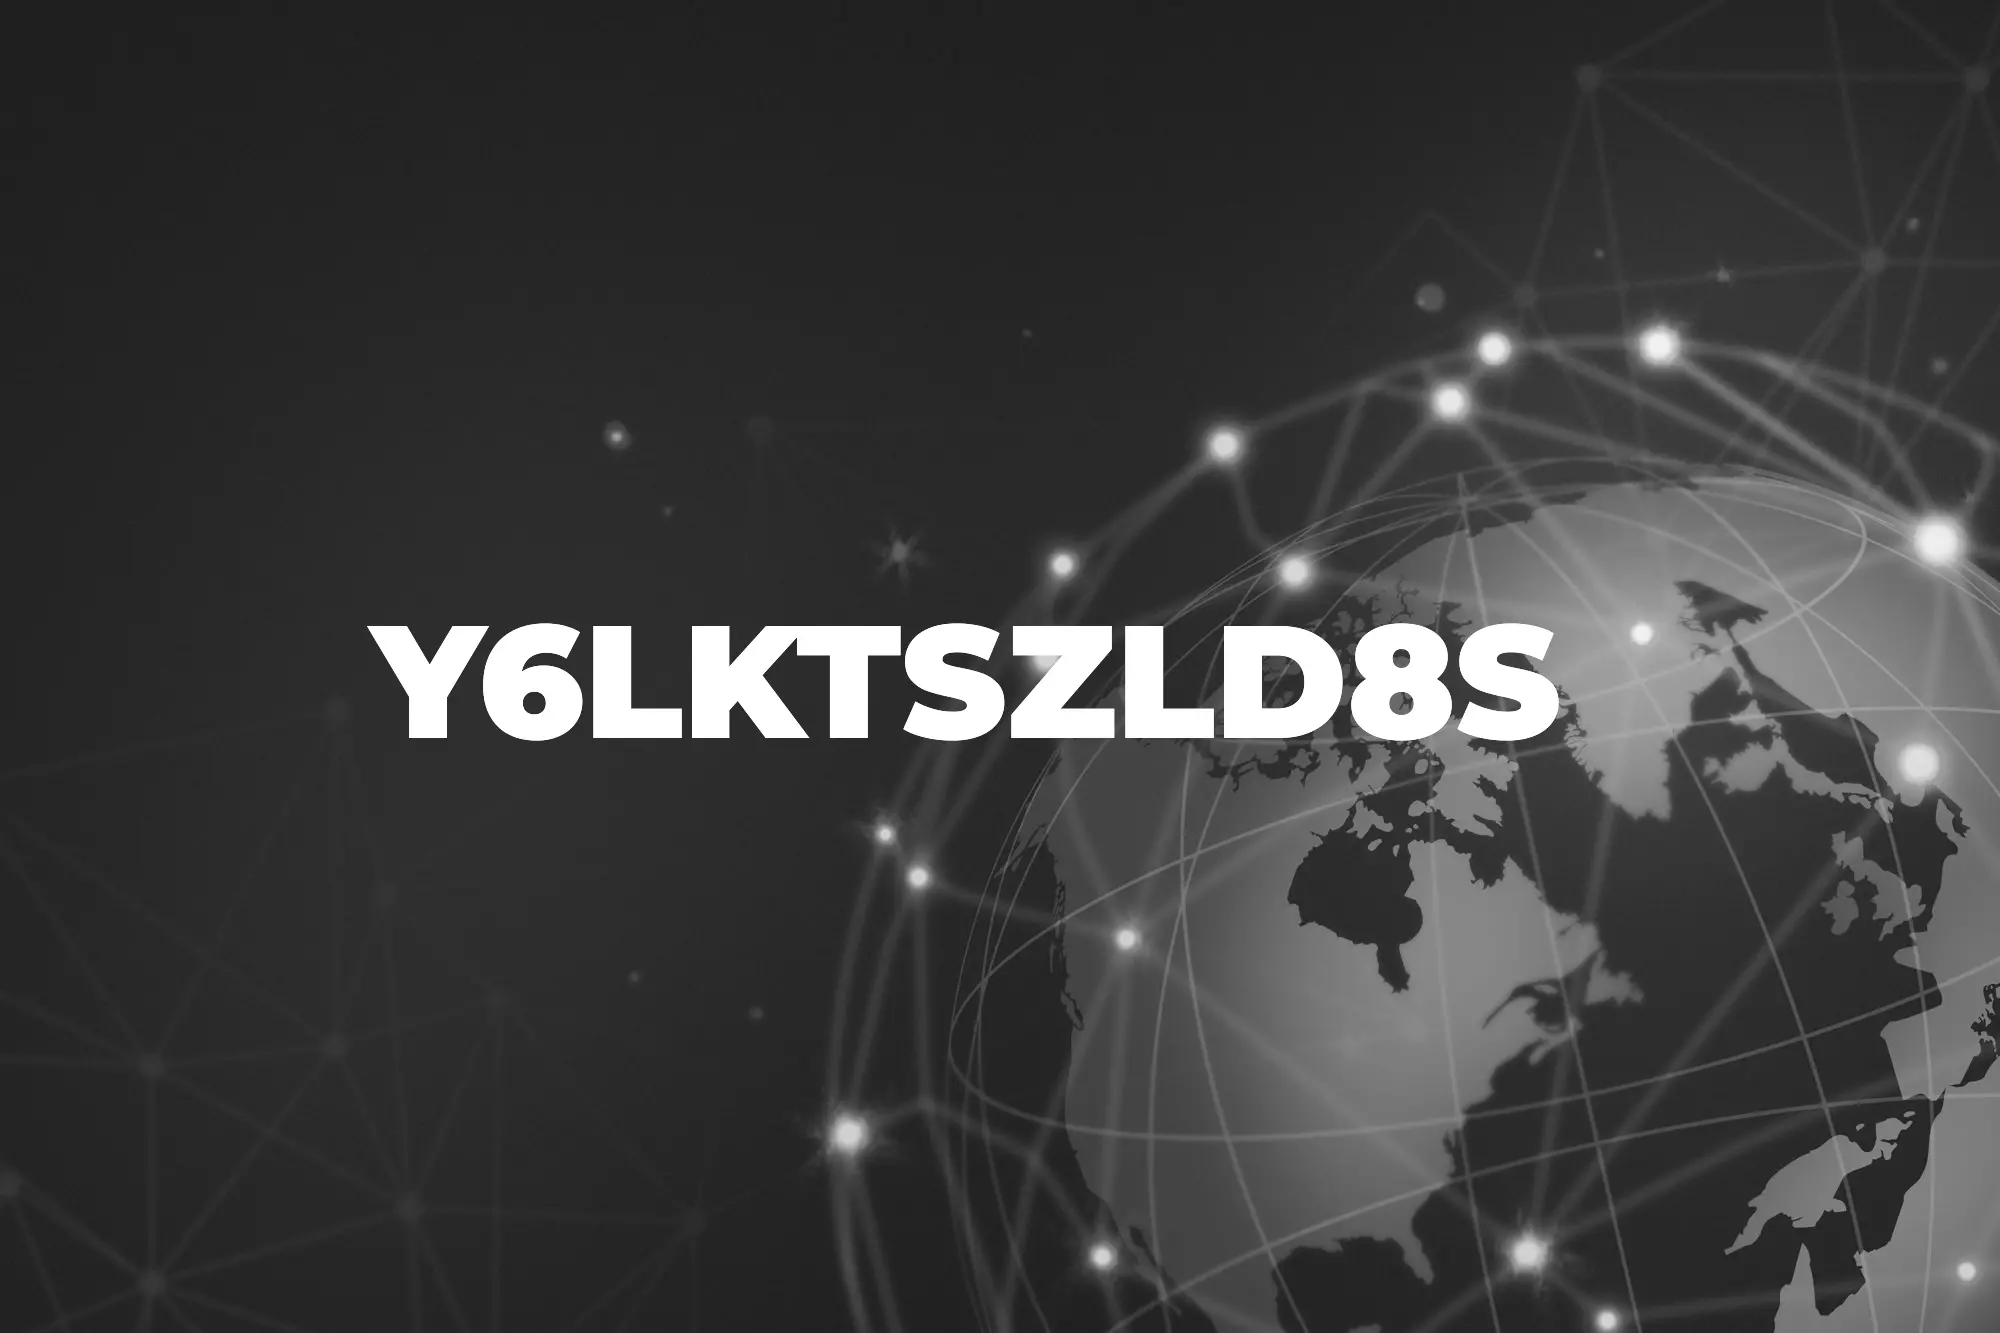 Y6lktszld8s: Automate Online Processes and Save Time